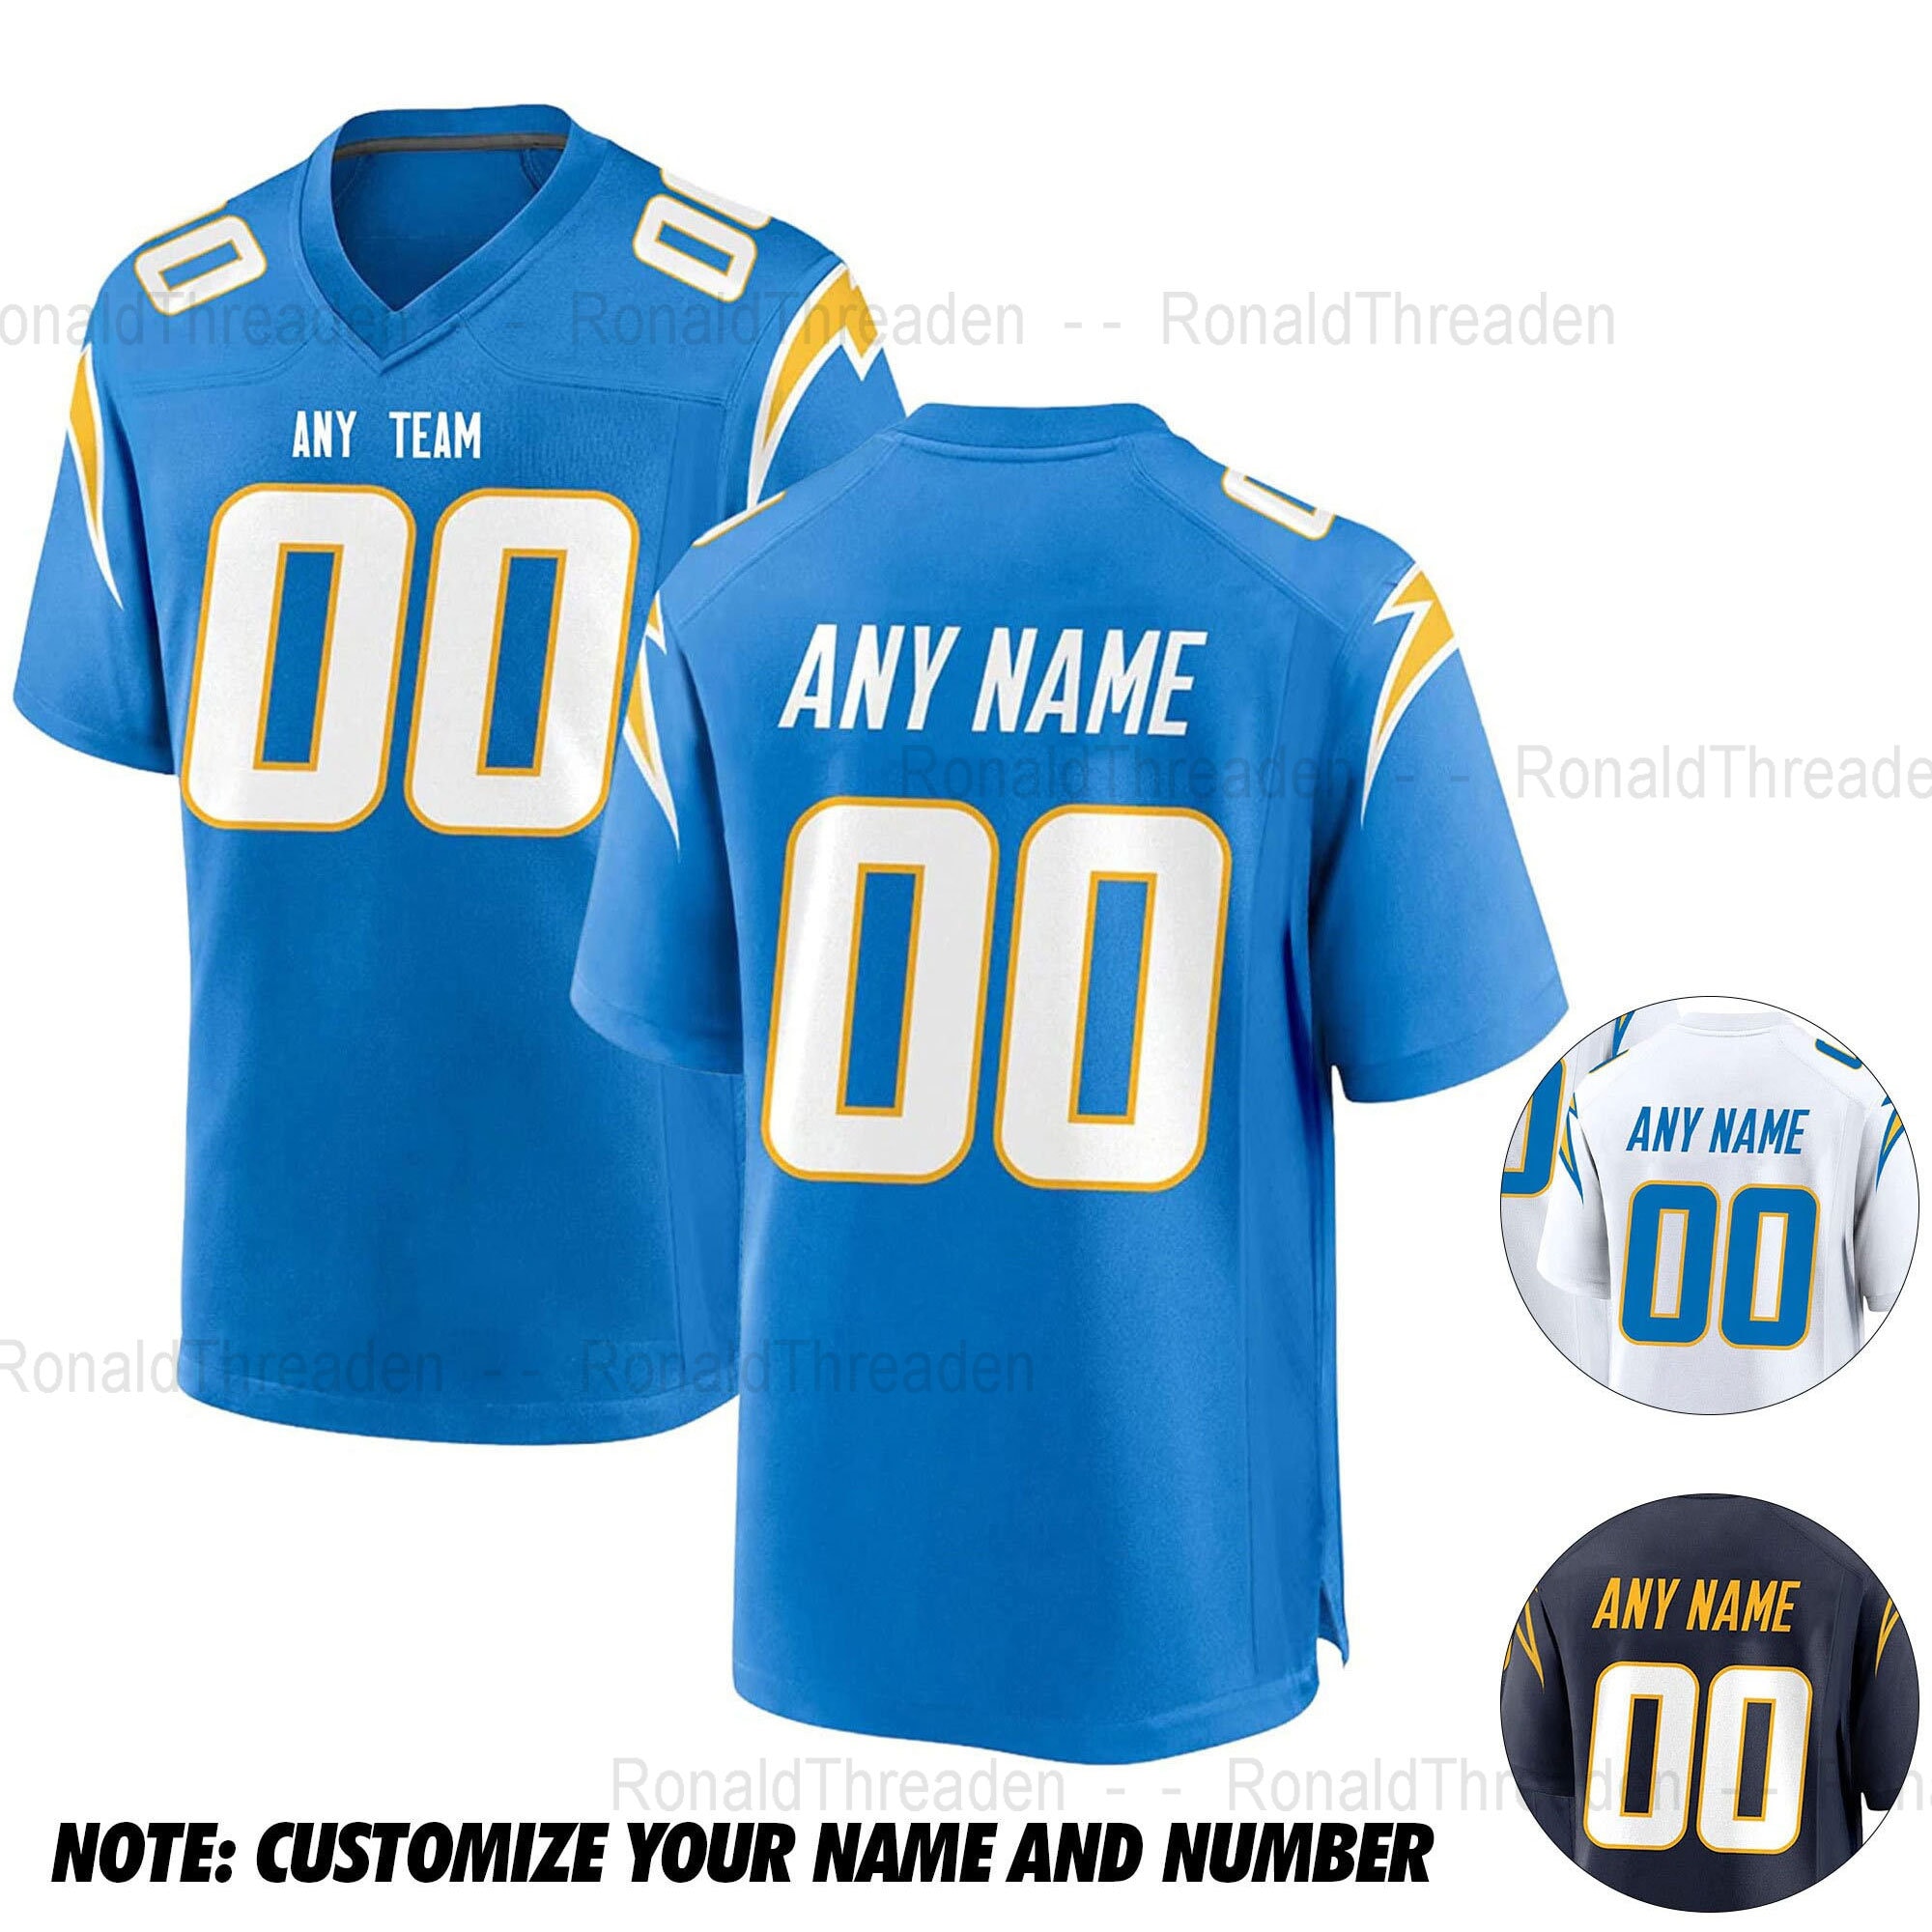 Los Angeles Chargers on X: White jerseys and navy pants for